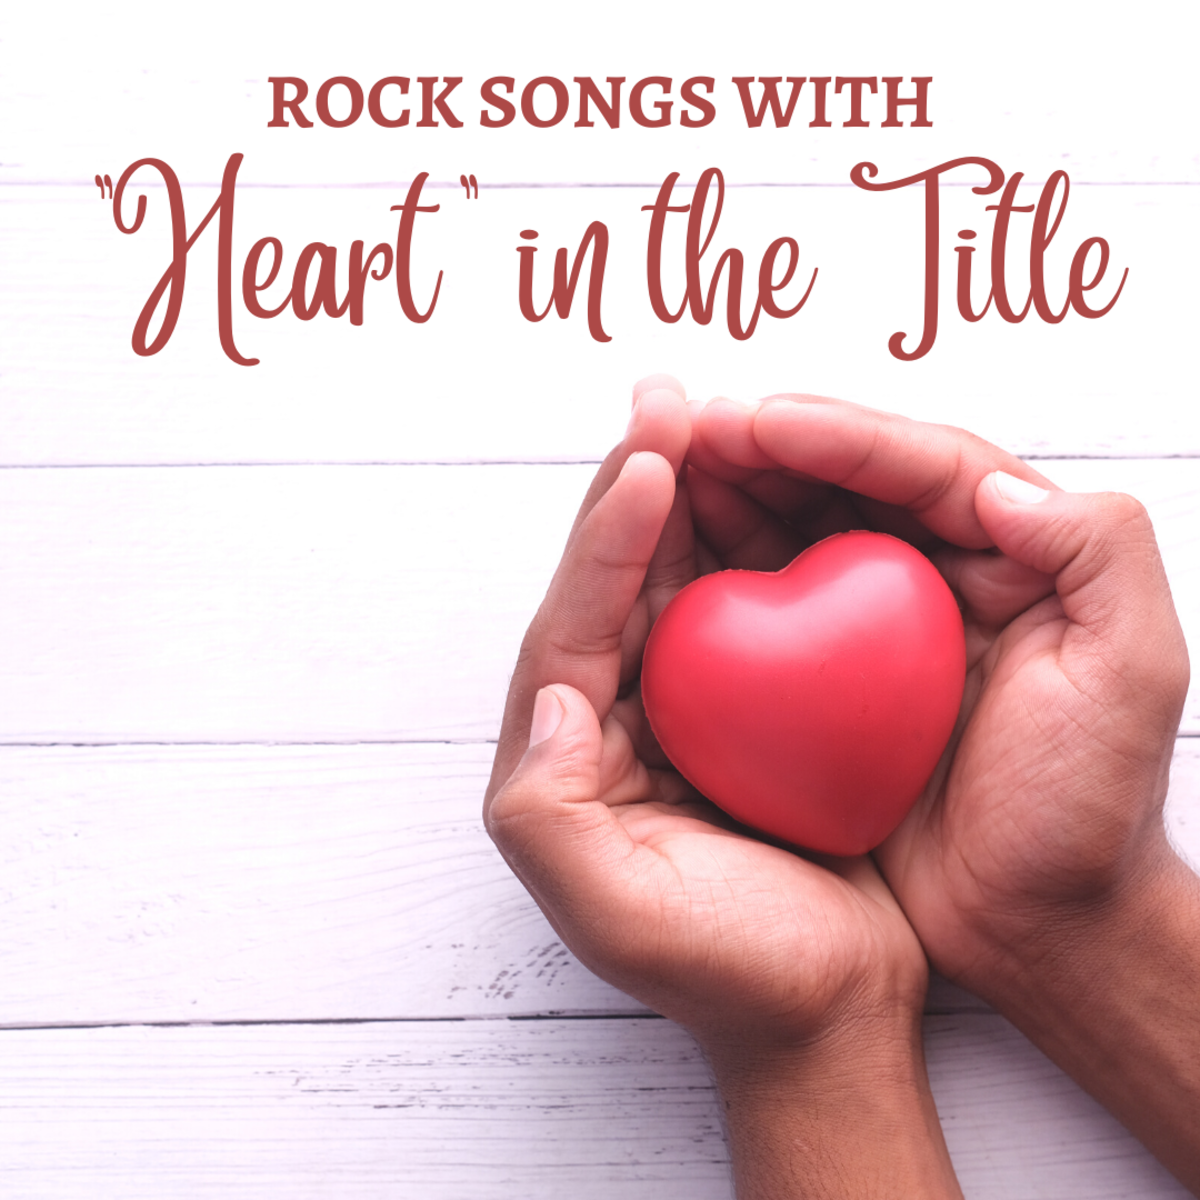 Searching for songs that'll tug your heartstrings? Look no further!